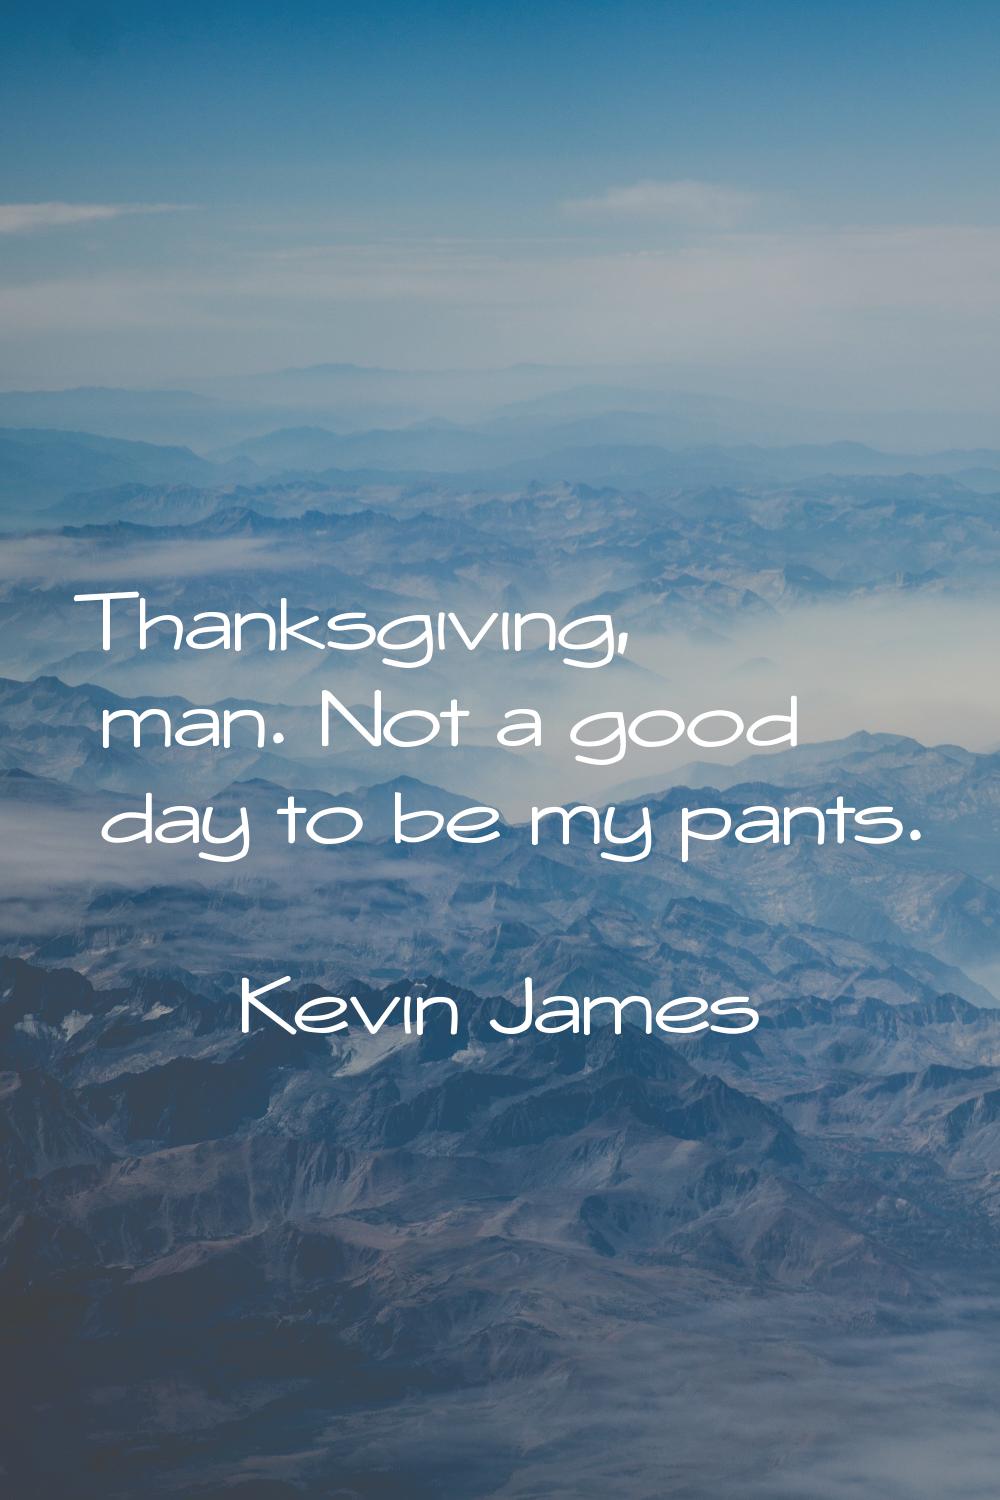 Thanksgiving, man. Not a good day to be my pants.